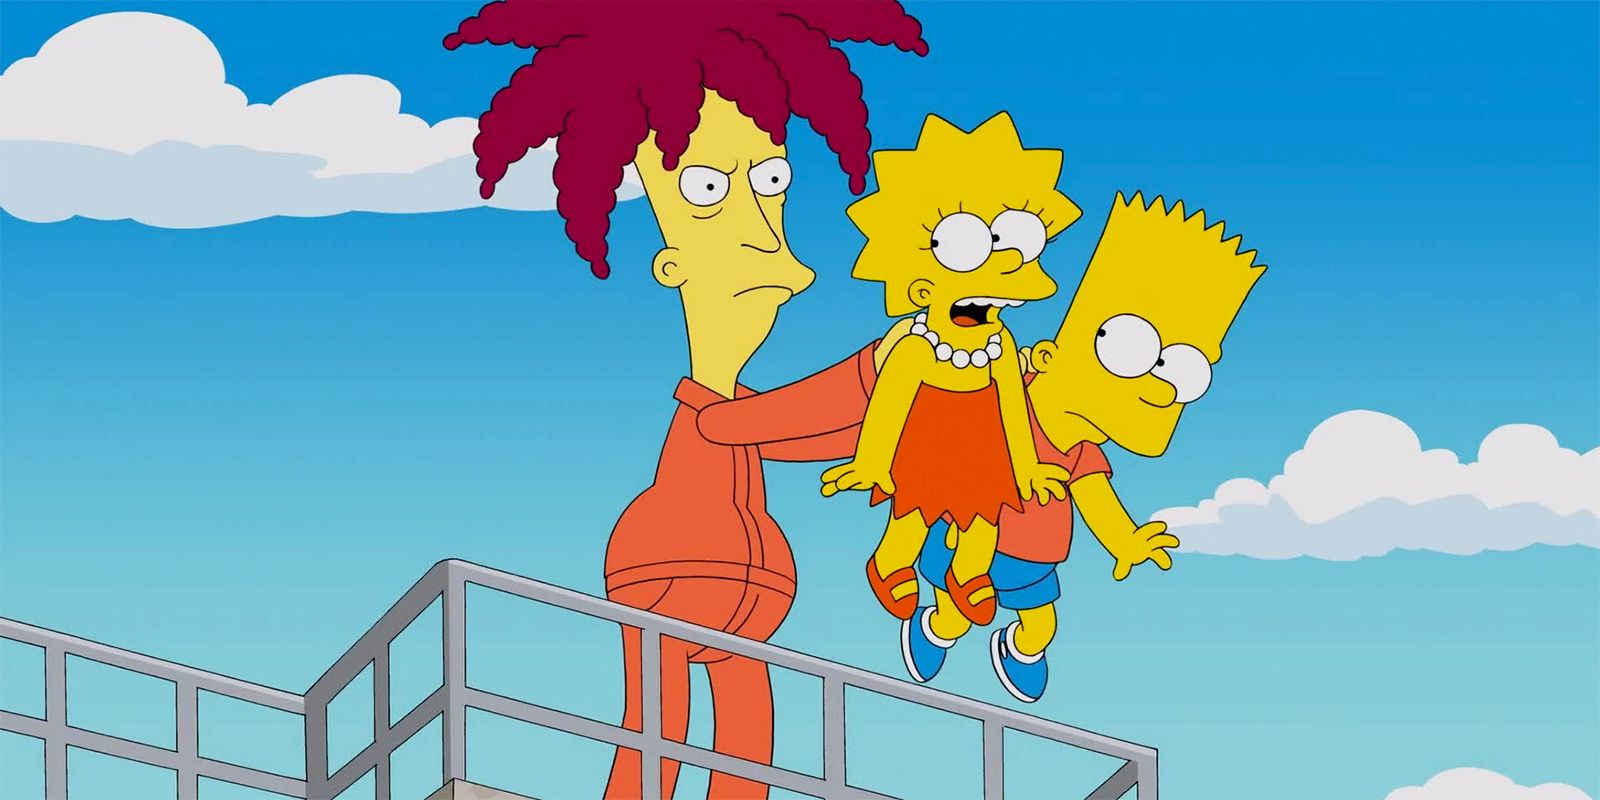 Sideshow Bob holds up Lisa and Bart in The Simpsons